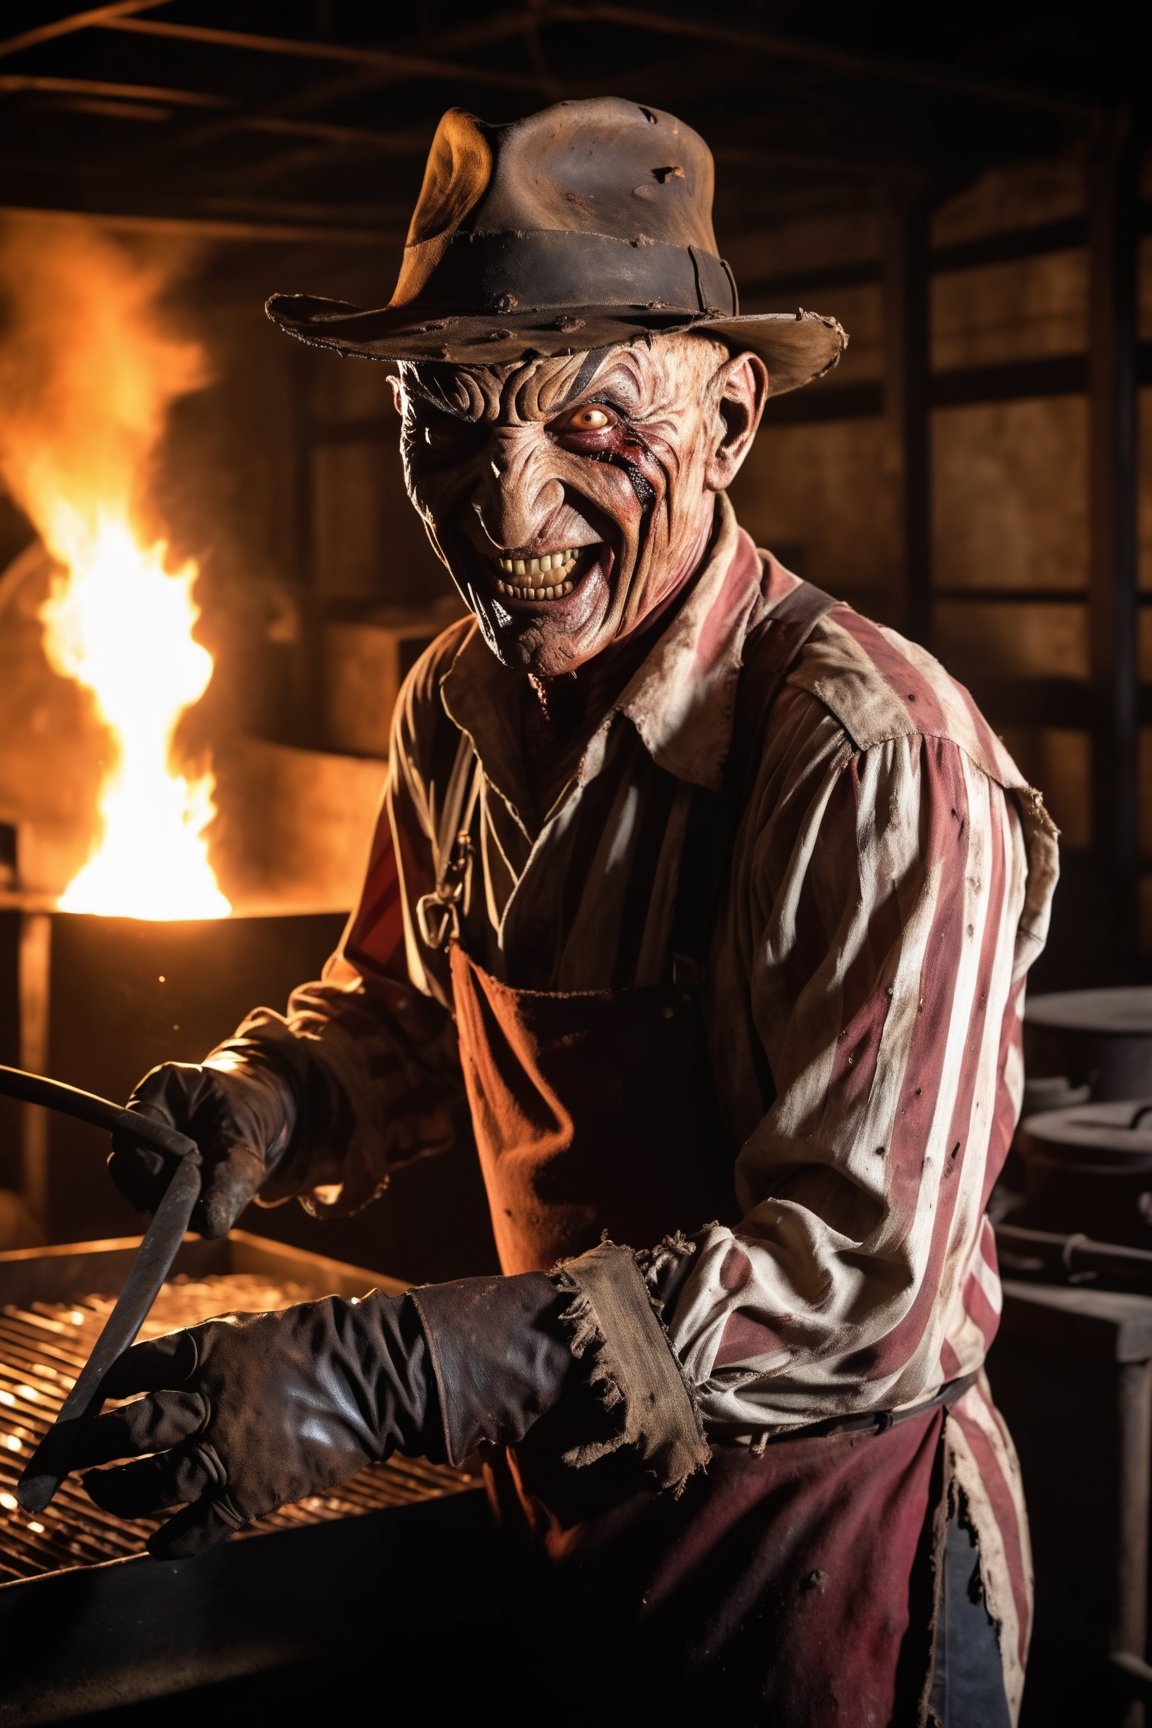 Freddy Krueger, evil smile, ragged shirt, wearing glove with long claws on right hand, inside old warehouse, dim light, big rusty iron oven, faucets leaking, fire, 